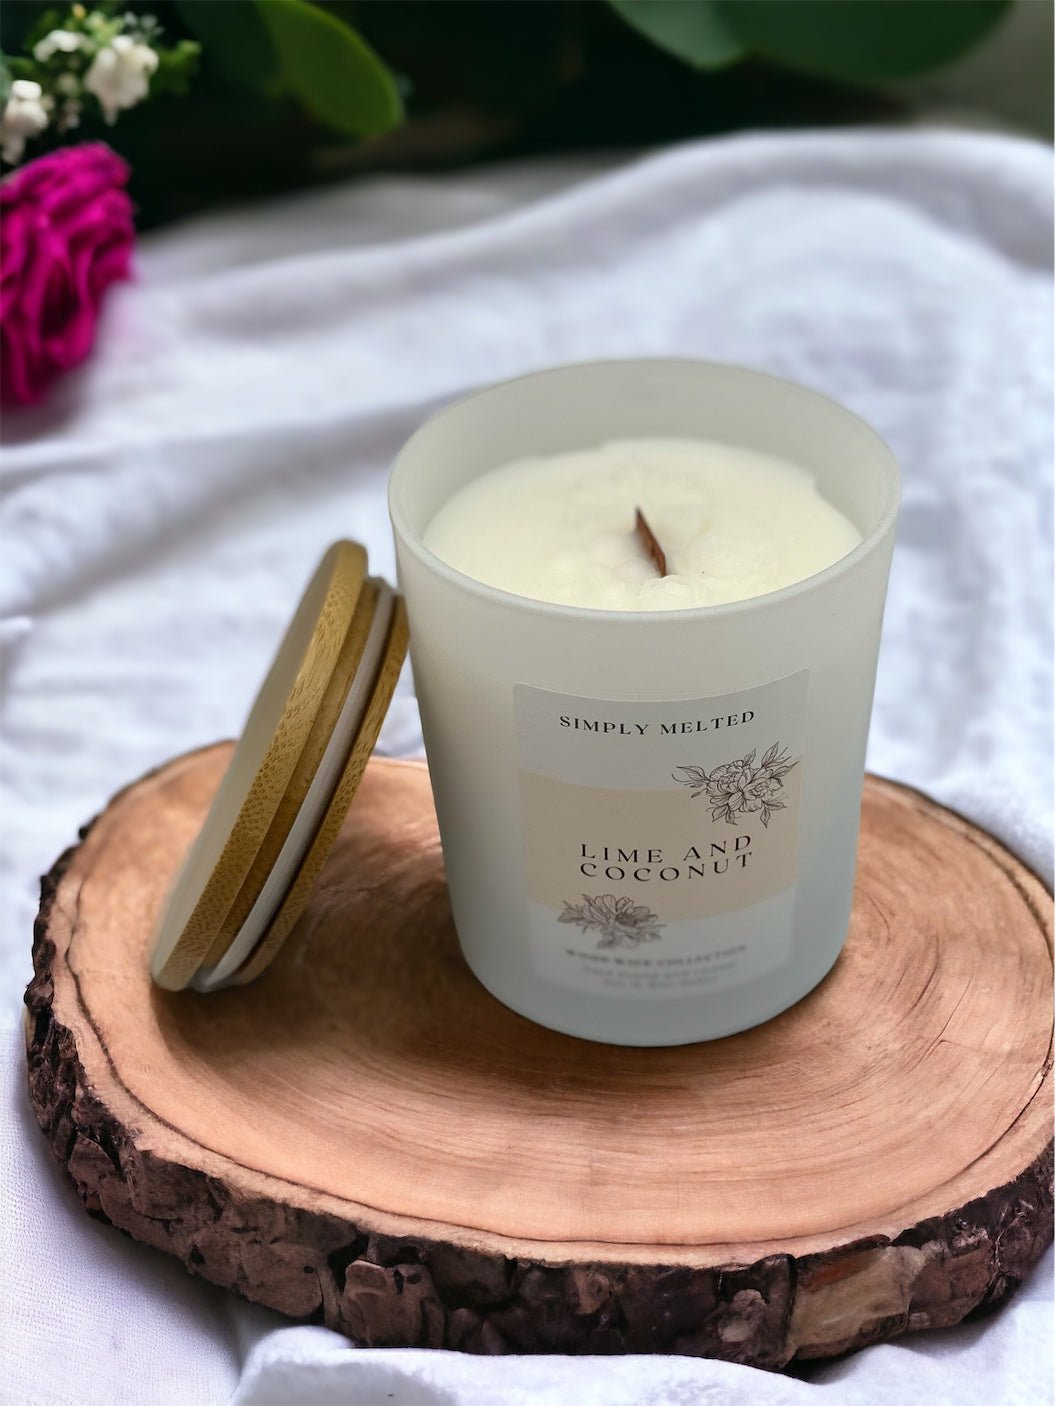 Lime and Coconut Wood Wick Candle - Simply Melted